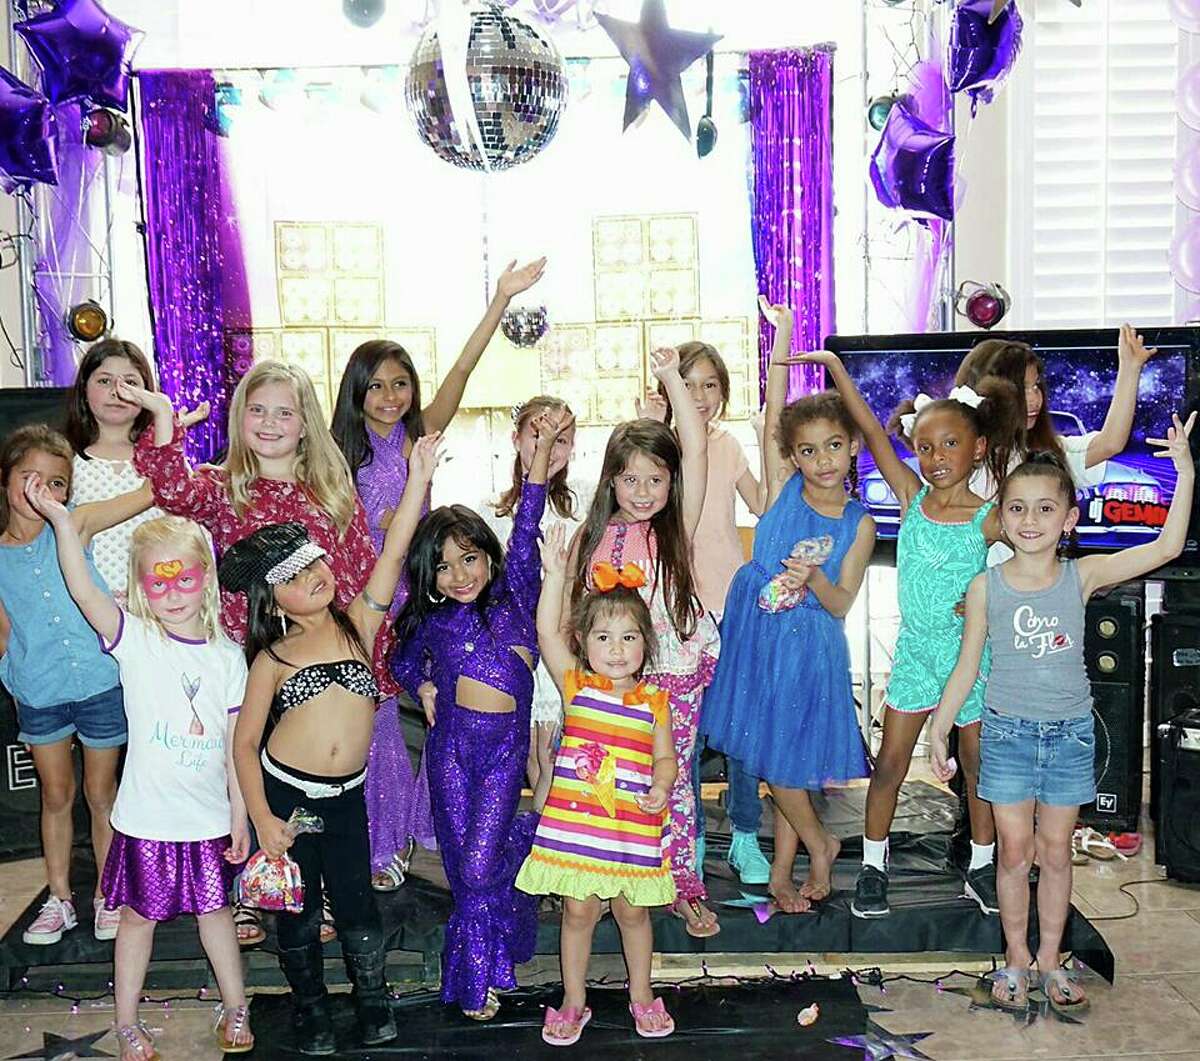 Family members describe 6-year-old Ayvah Vega as a little girl with a giant personality, who happens to be a Selena superfan. Her only request for her party last weekend was for the Queen of Tejano to be the theme.